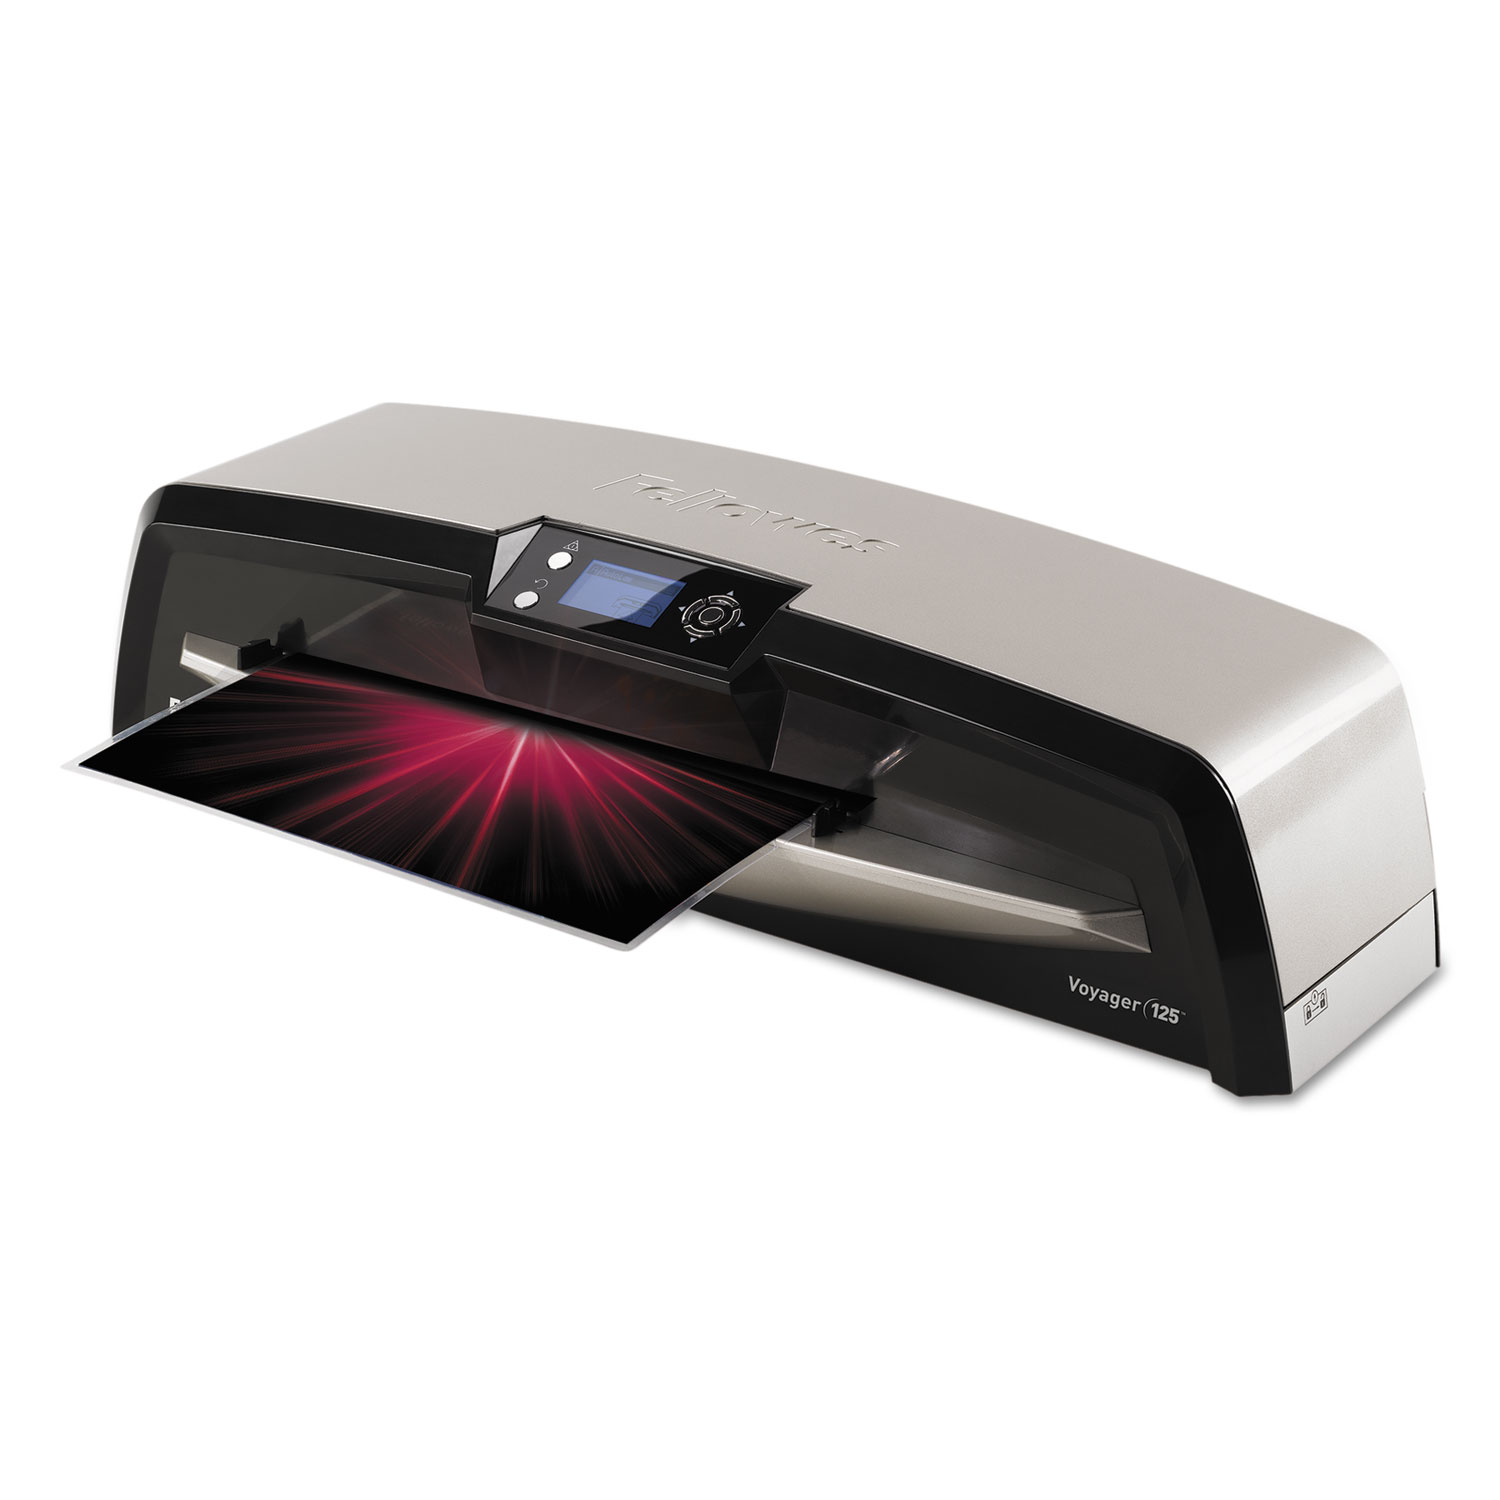  Fellowes 5218601 Voyager 125 Laminator , 12 Max Document Width, 10 mil Max Document Thickness (FEL5218601) 